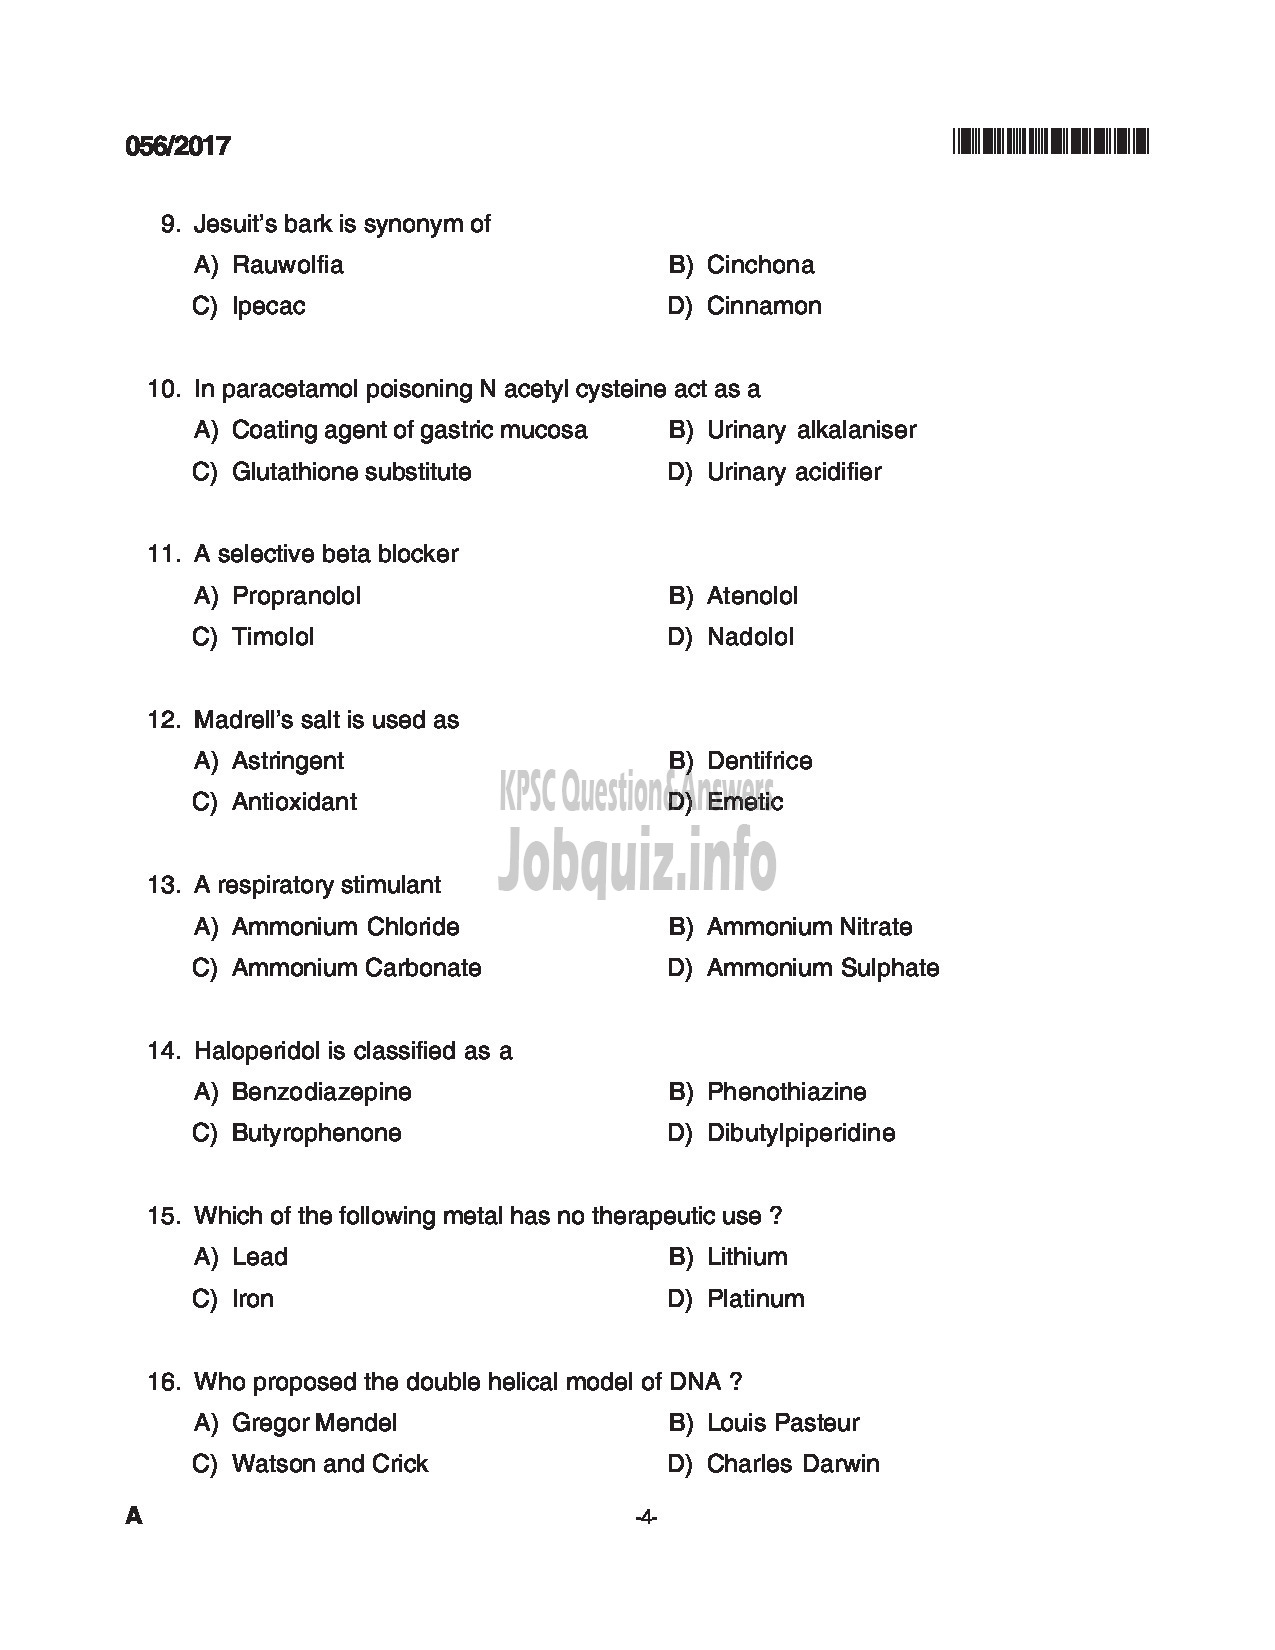 Kerala PSC Question Paper - PHARMACIST GRADE II INSURANCE MEDICAL SERVICES QUESTION PAPER-4